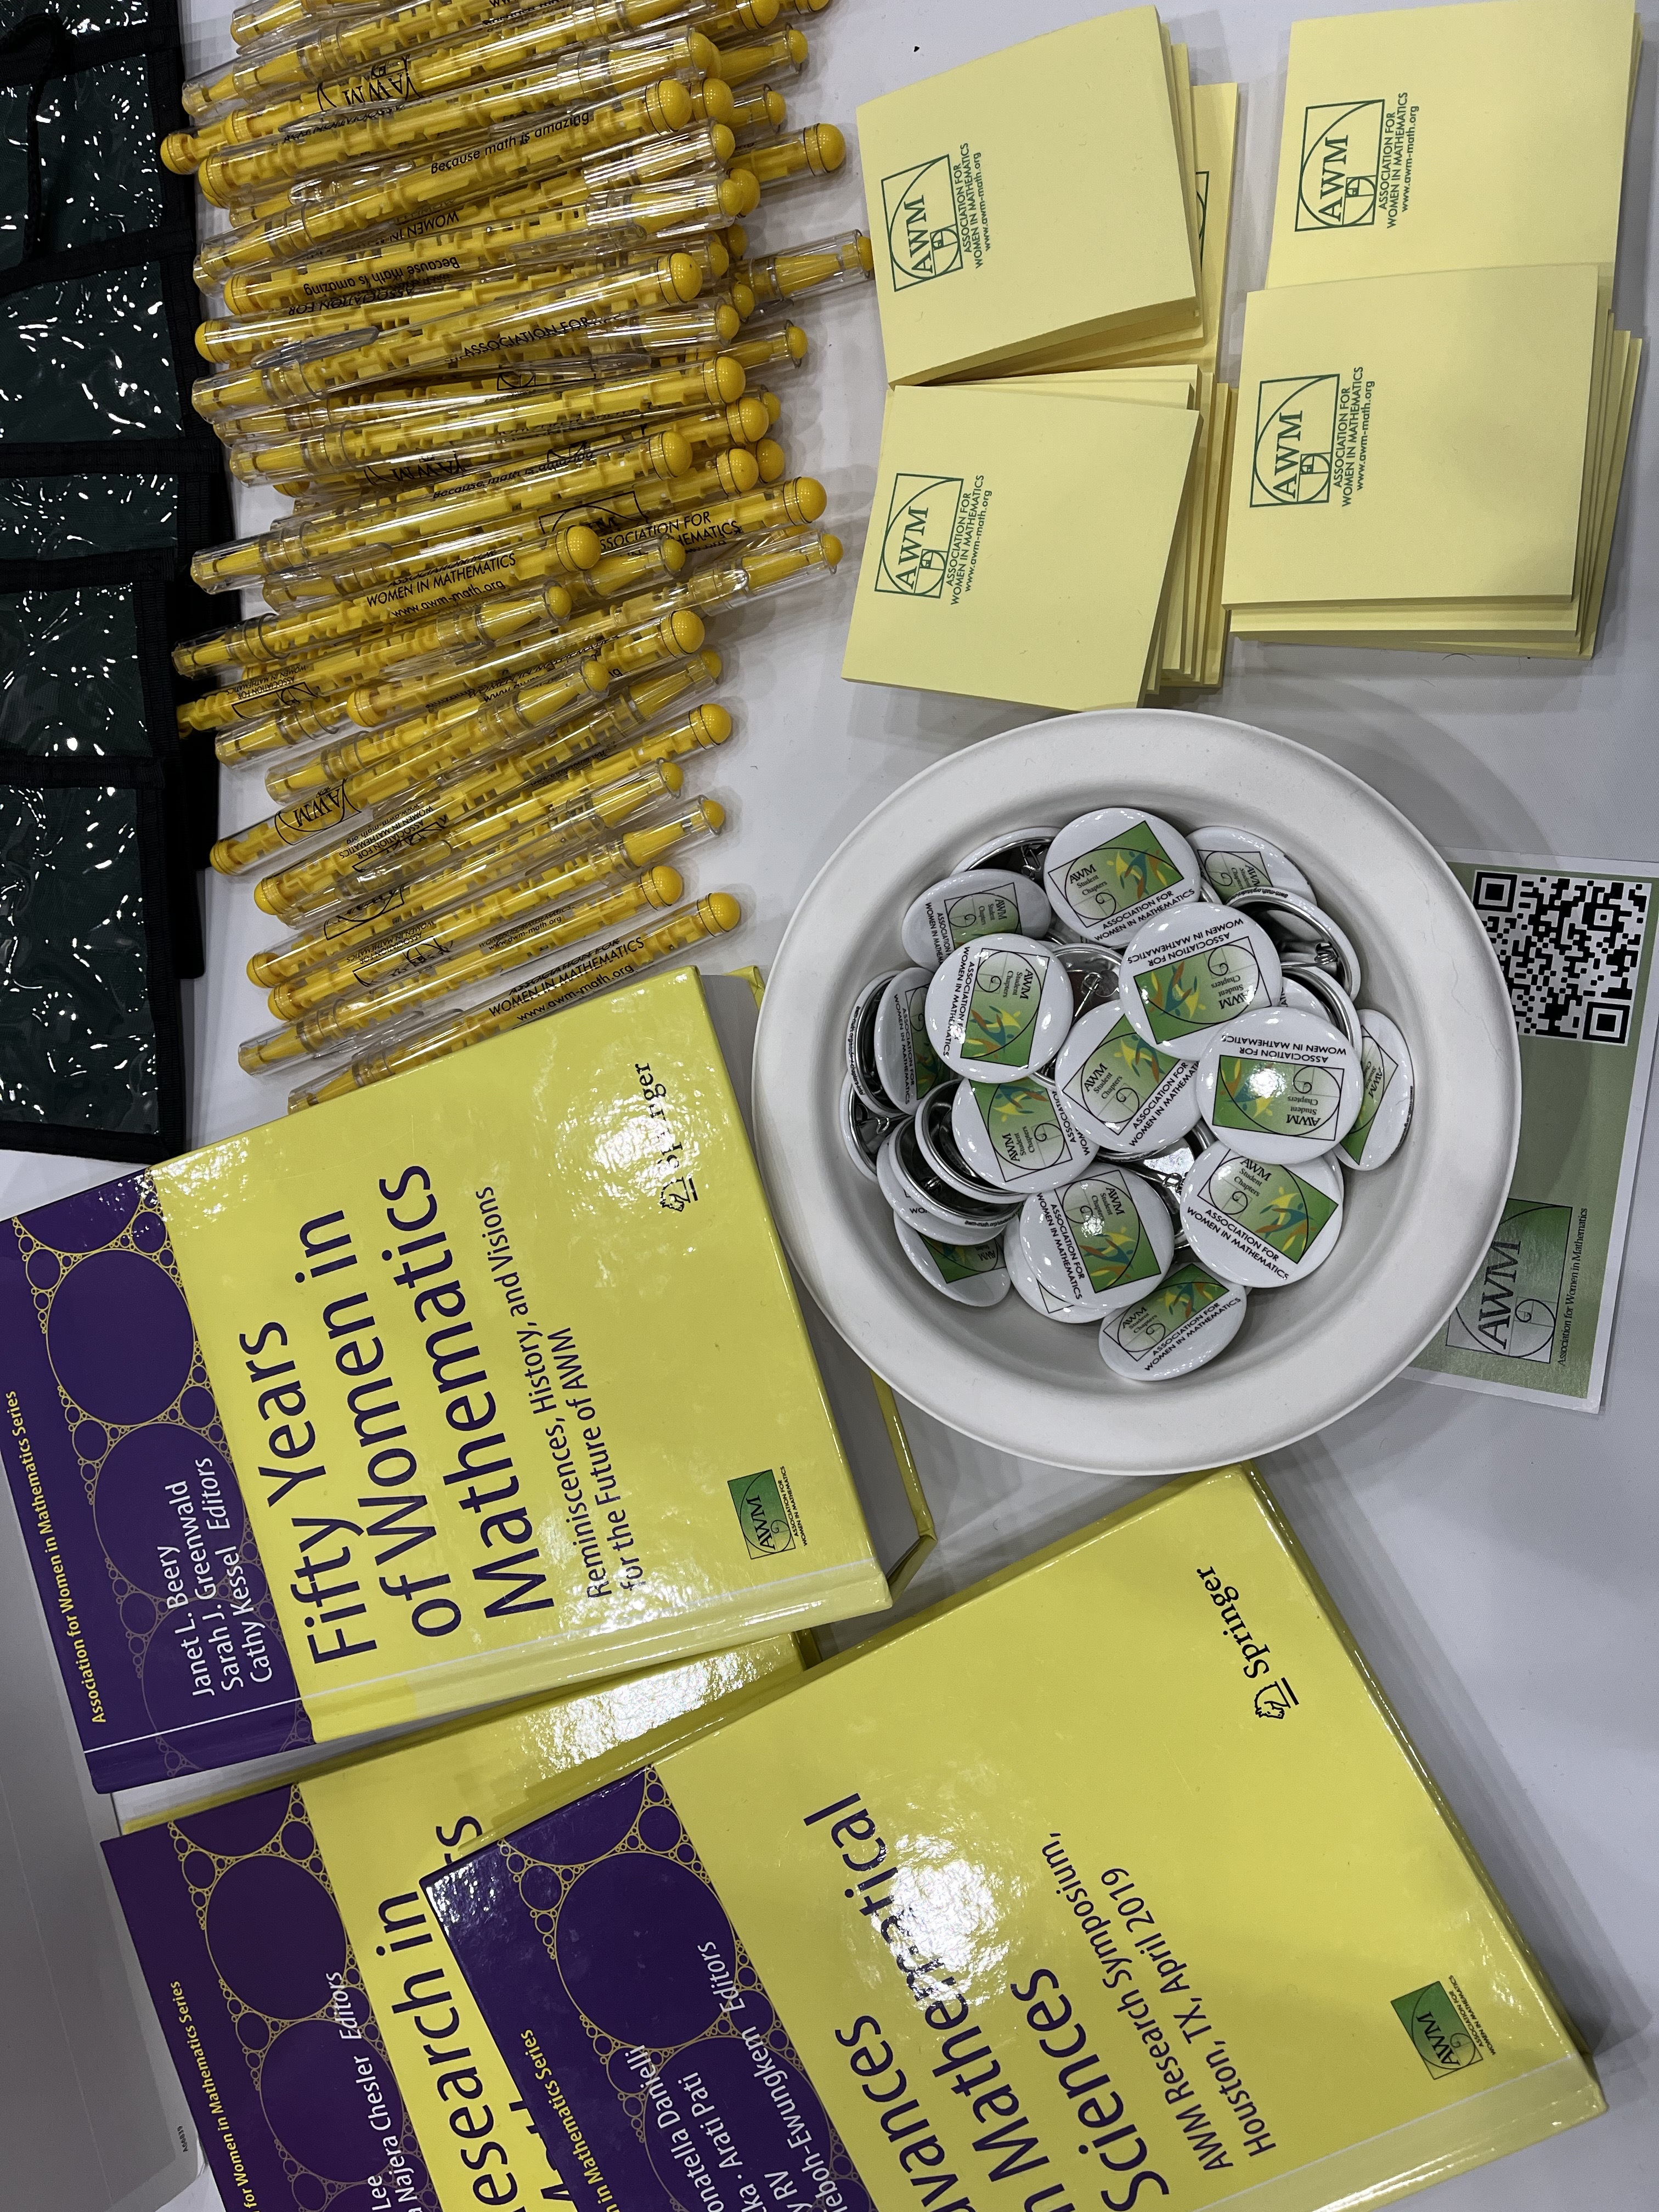 A table in the Joint Math Meetings exhibit hall with items from the Association for Women in Mathematics. The items include three books from the association, including one titled, “Fifty Years of Women in Mathematics.” There are also items with the association’s logo, including pencils, buttons, and Post-its. 